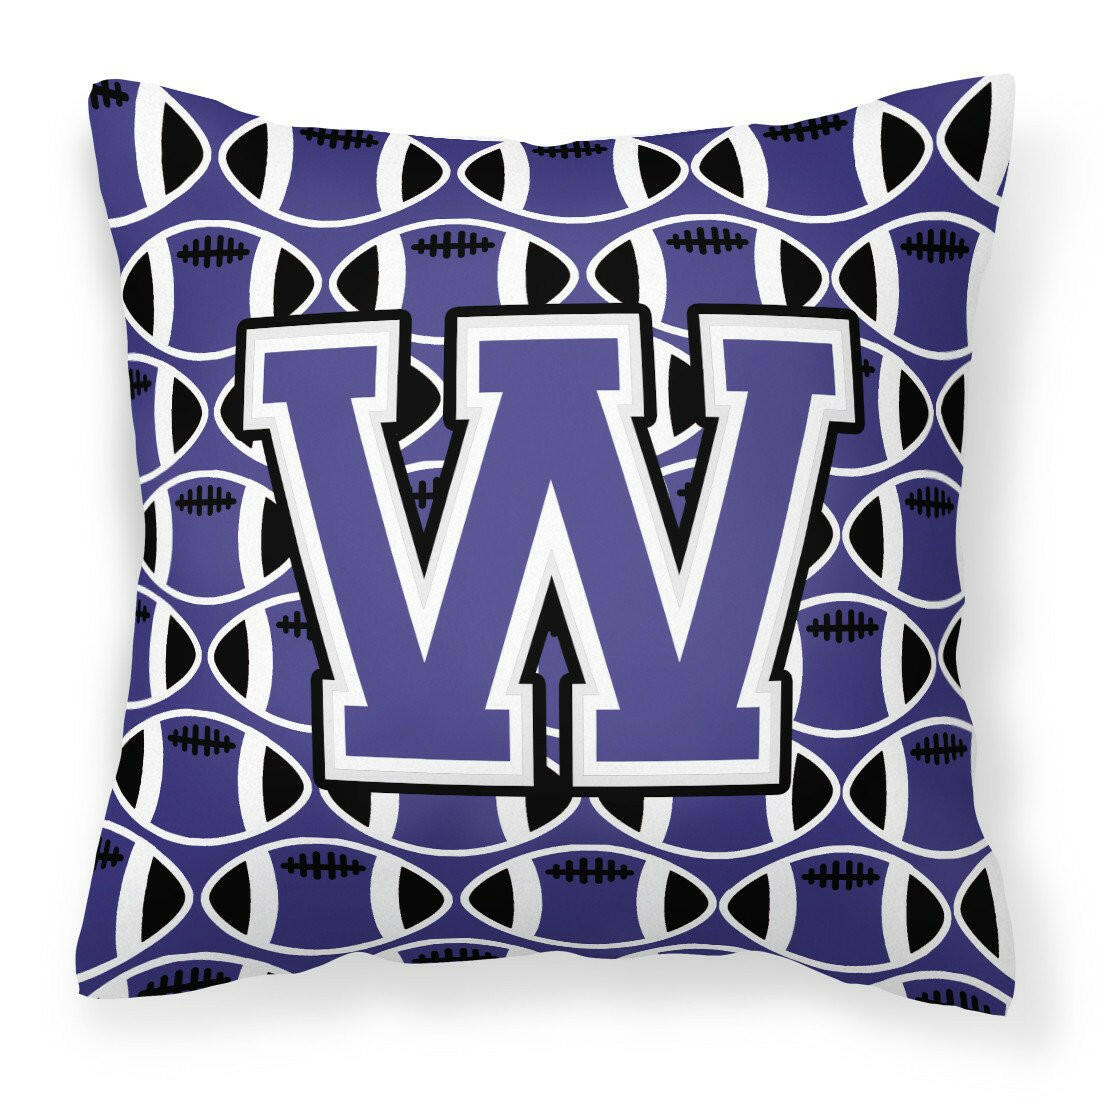 Letter W Football Purple and White Fabric Decorative Pillow CJ1068-WPW1414 by Caroline's Treasures